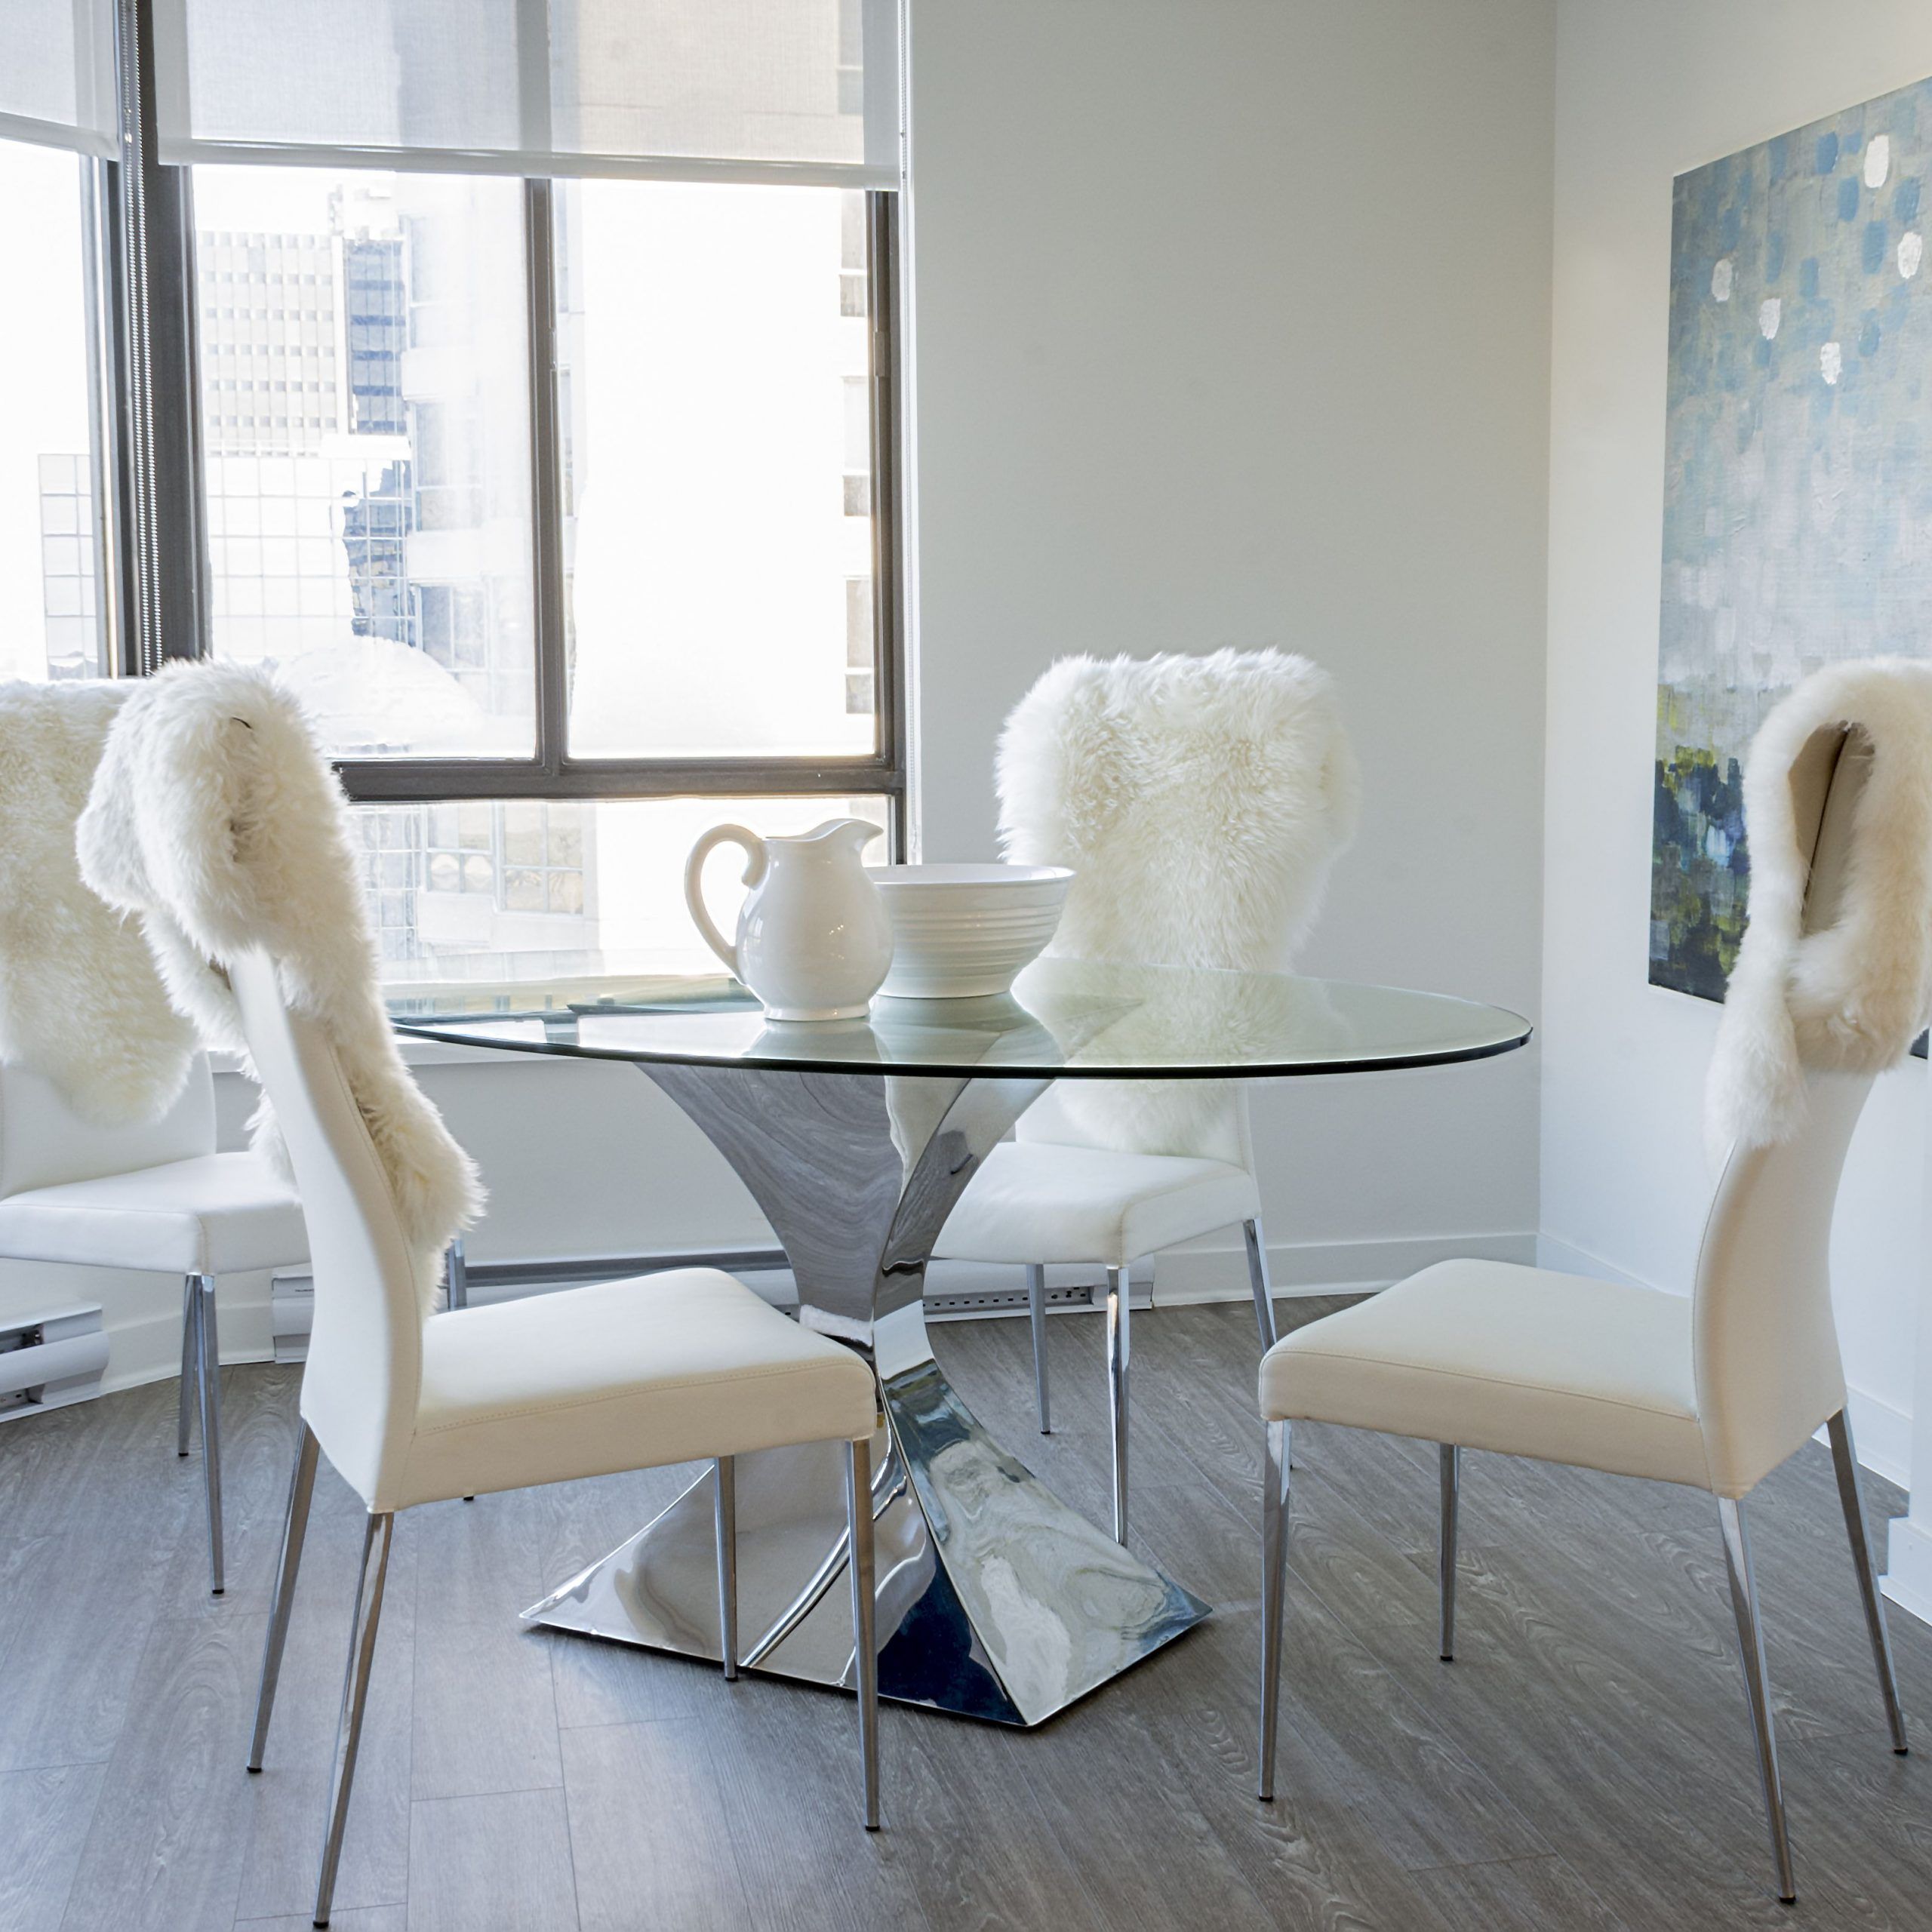 Best And Newest Glass Top Condo Dining Tables For Condo Dining With A View. We Used A Glass Oval Table Top To (Photo 1 of 25)